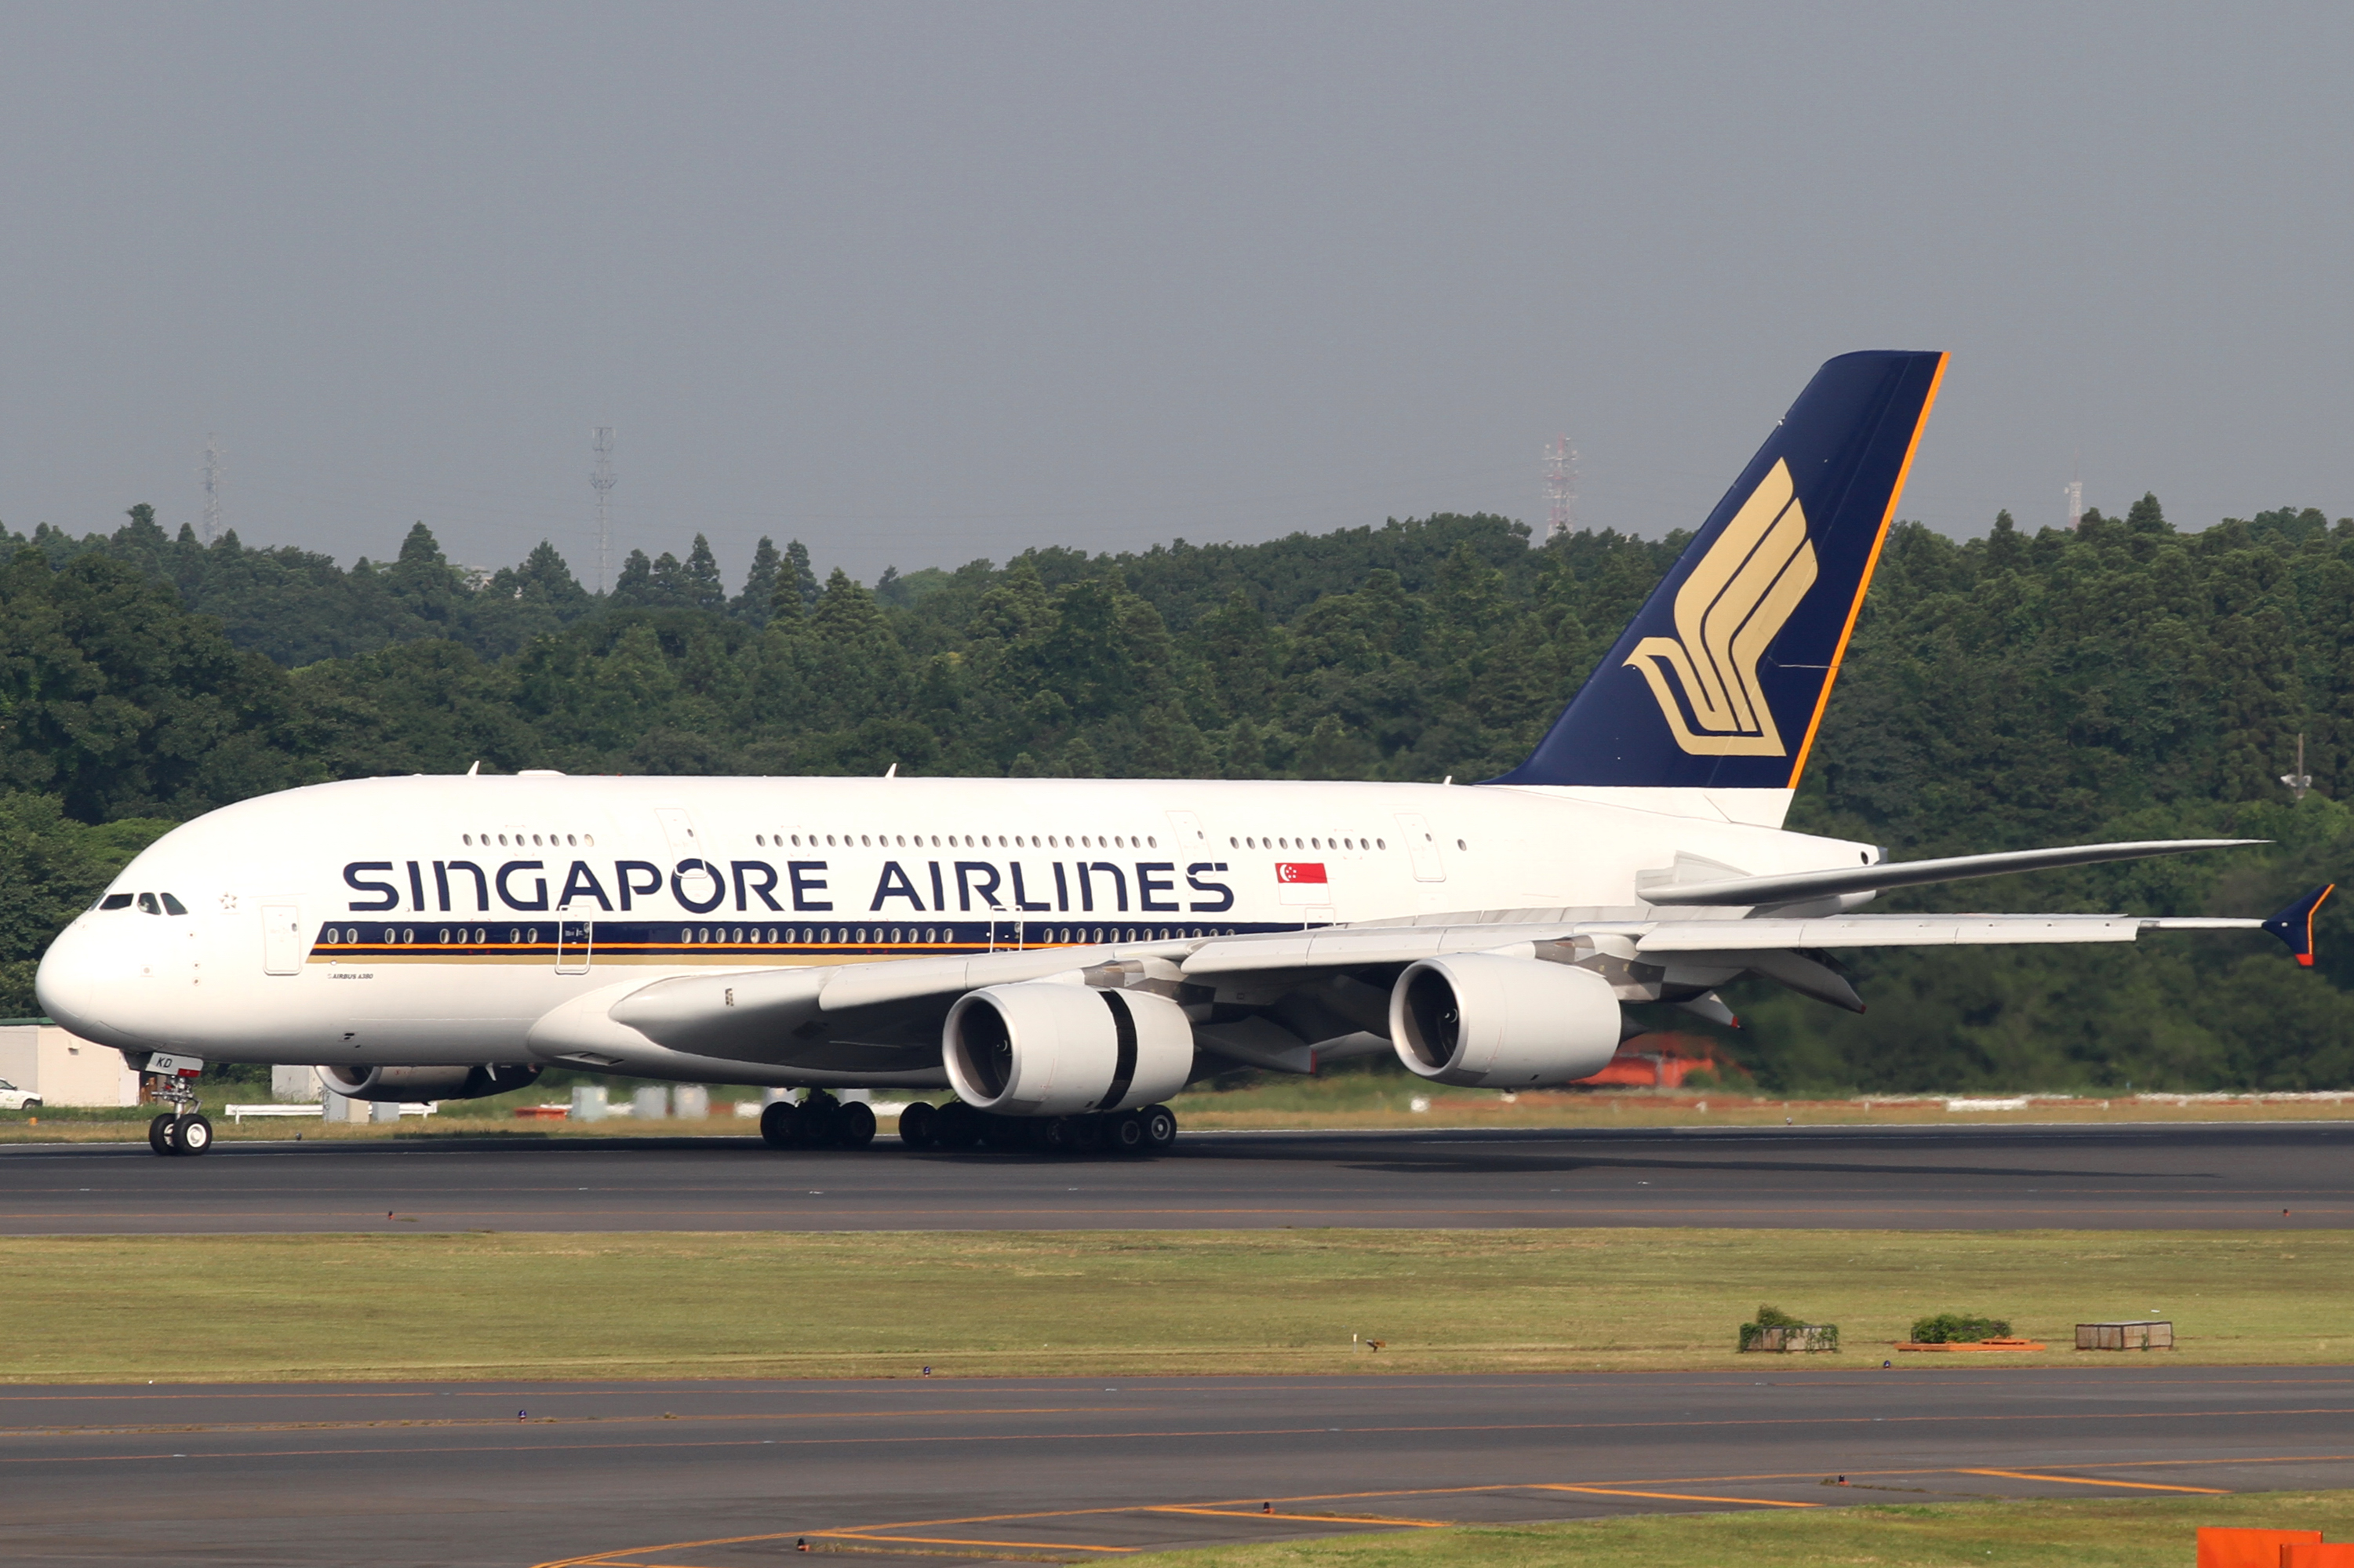 Singapore_Airlines_A380-800(9V-SKD)_(4693344489)